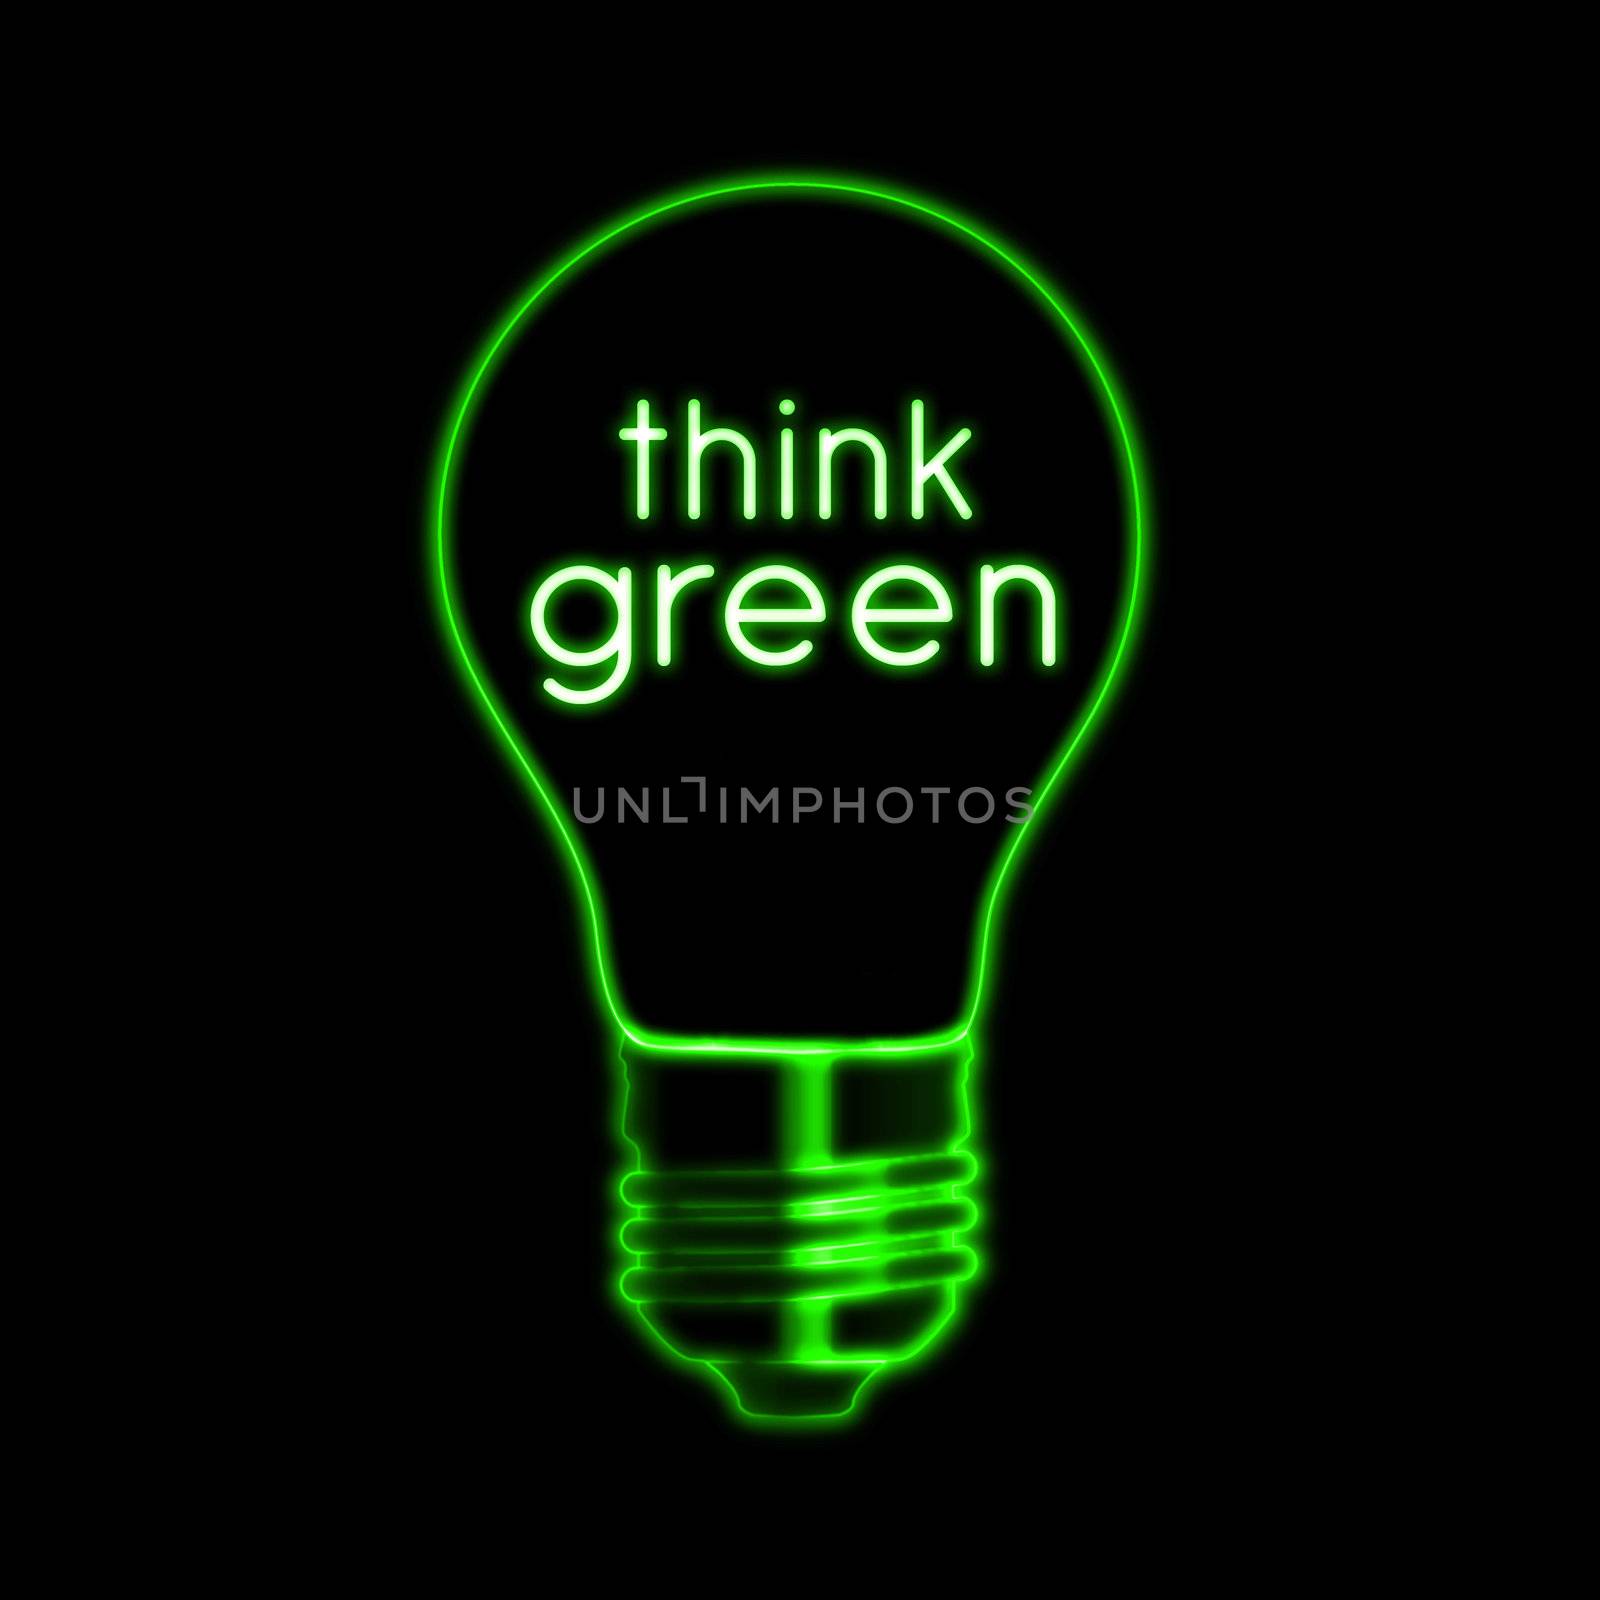 Think green illustration of bulb neon bulb and text